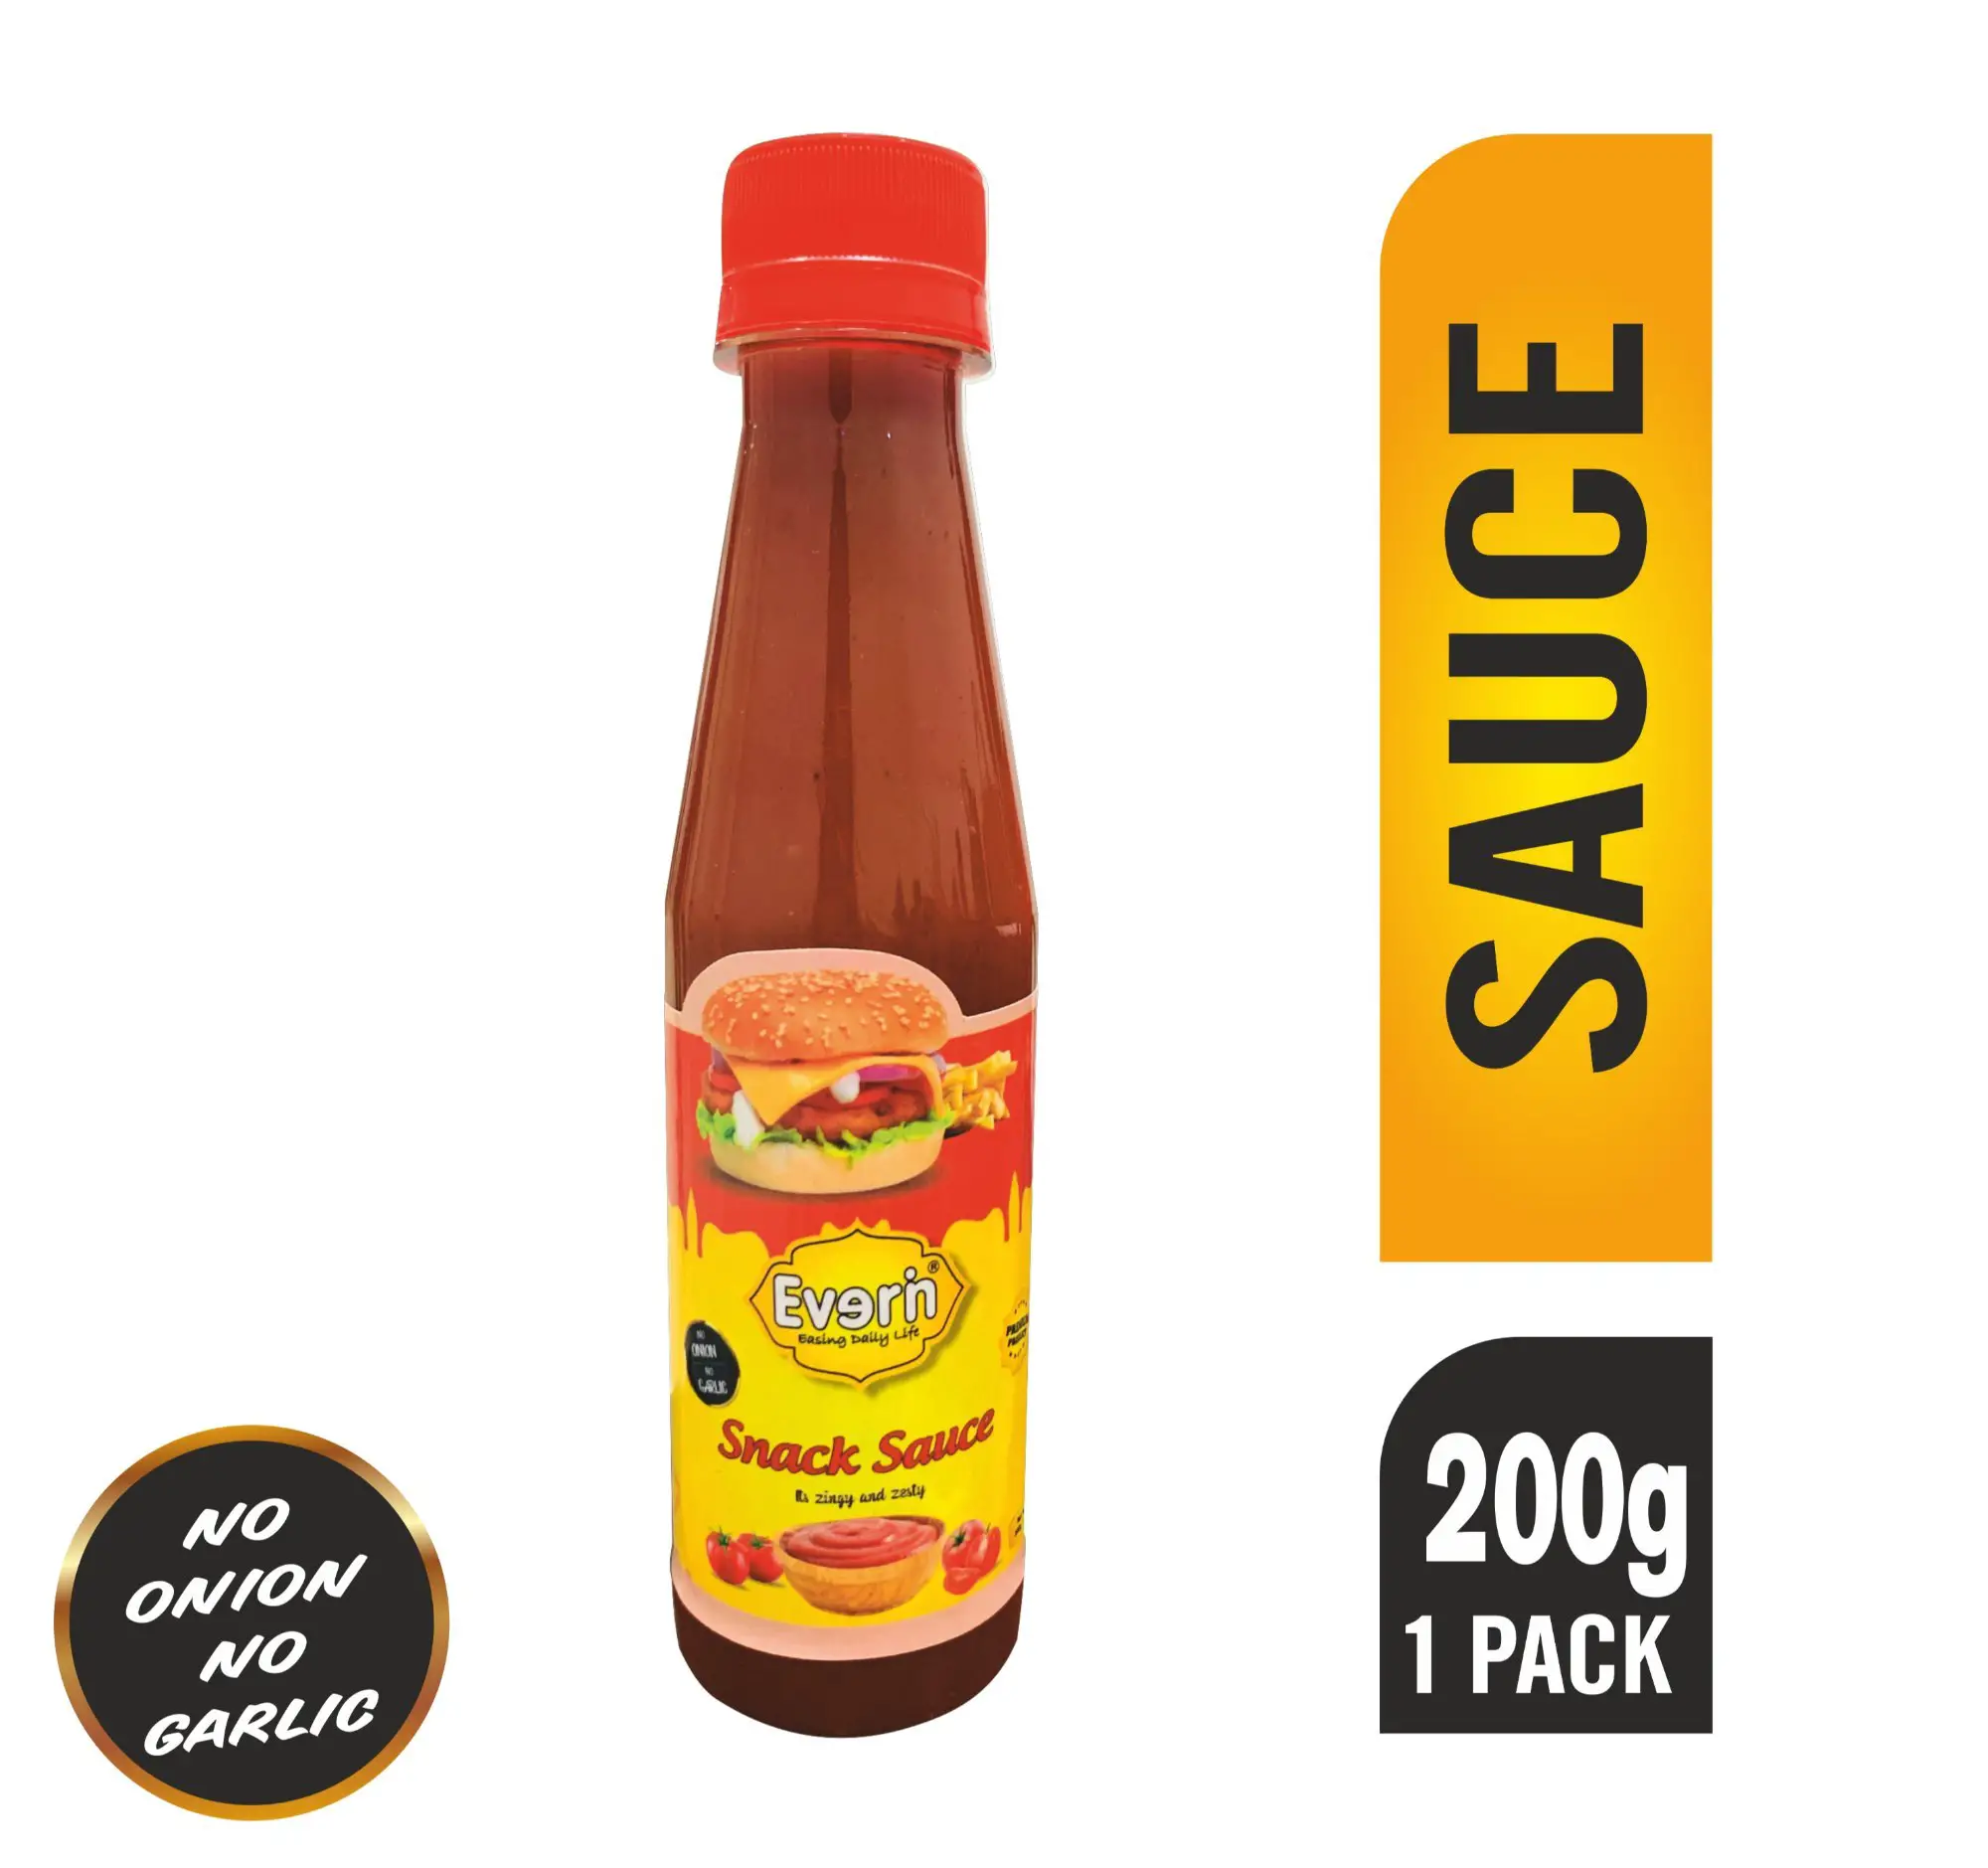 Everin Snack Sauce (No Onion No Garlic) at Rs 50/bottle